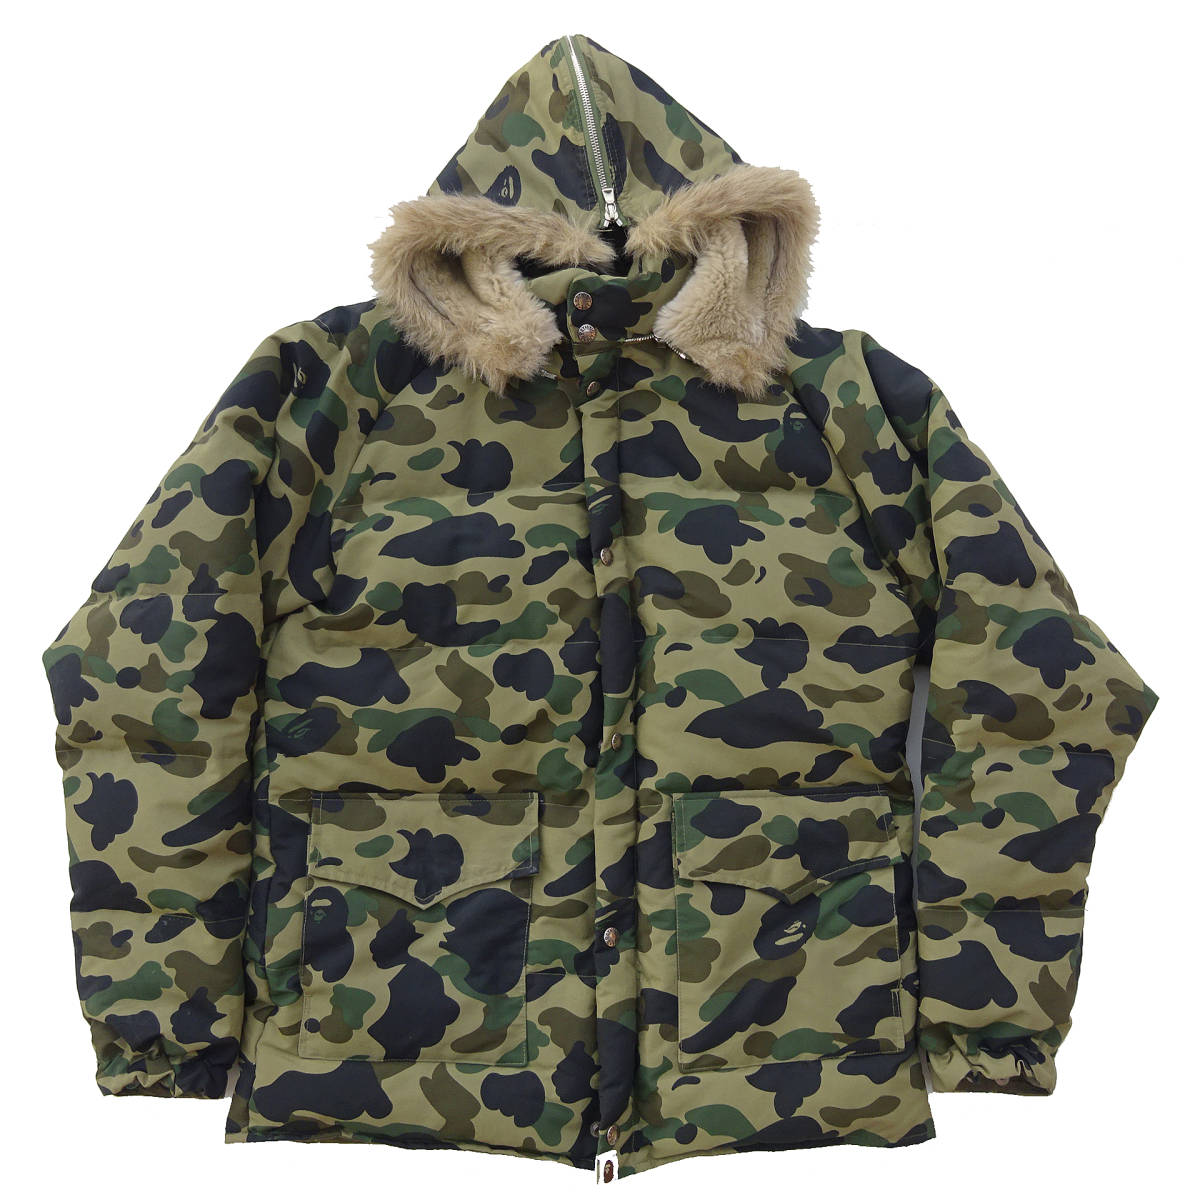 A BATHING APE A Bathing Ape down camouflage camouflage fur attaching down jacket size L FUR hoodie down jacket 1st camo green